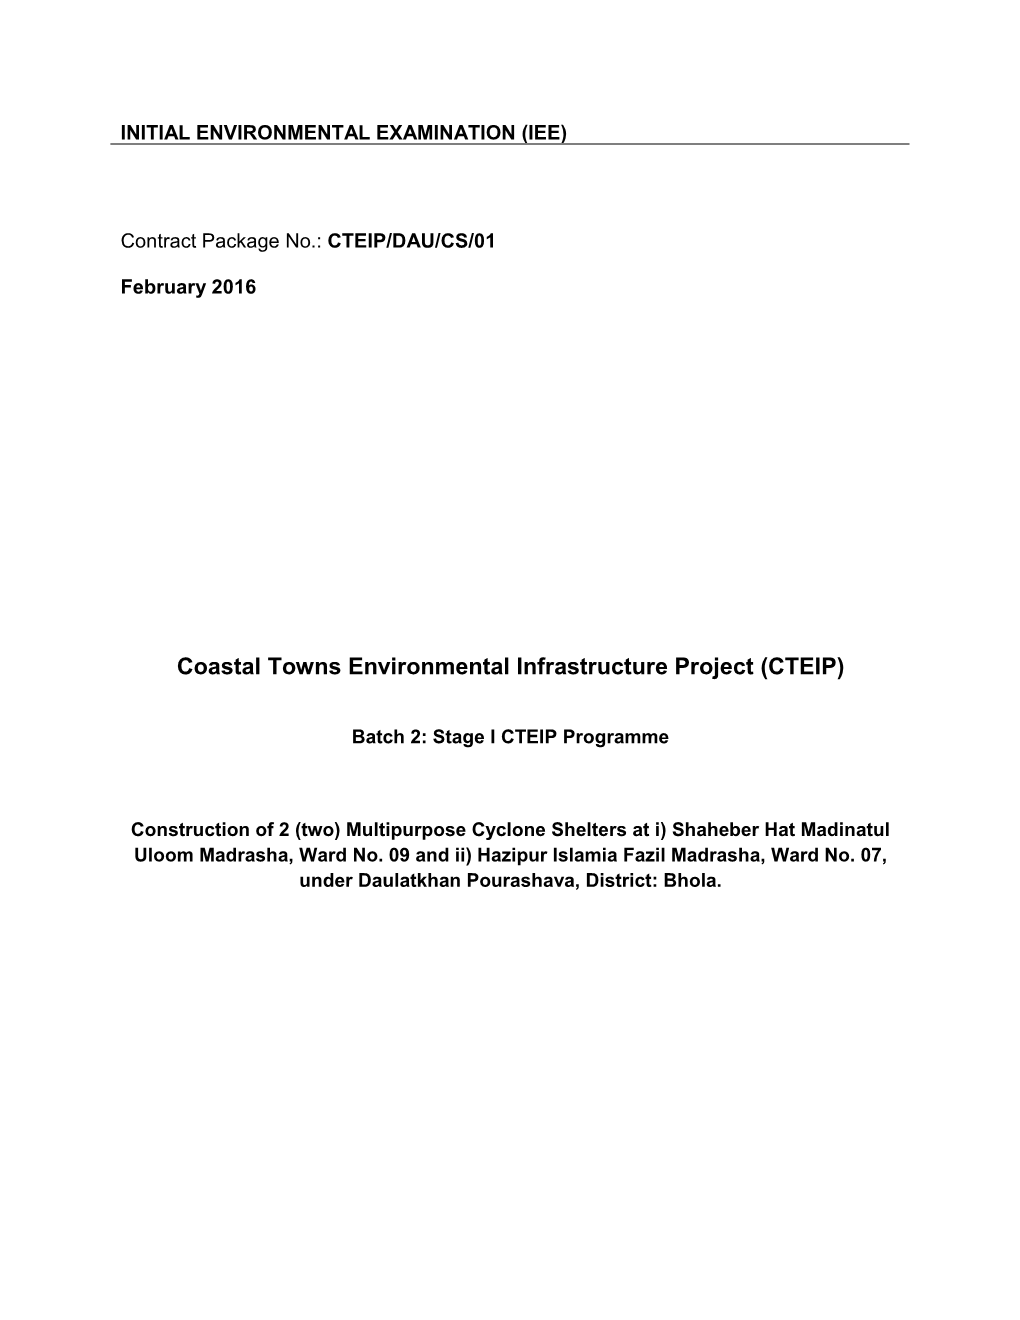 Coastal Towns Environmental Infrastructure Project (CTEIP)